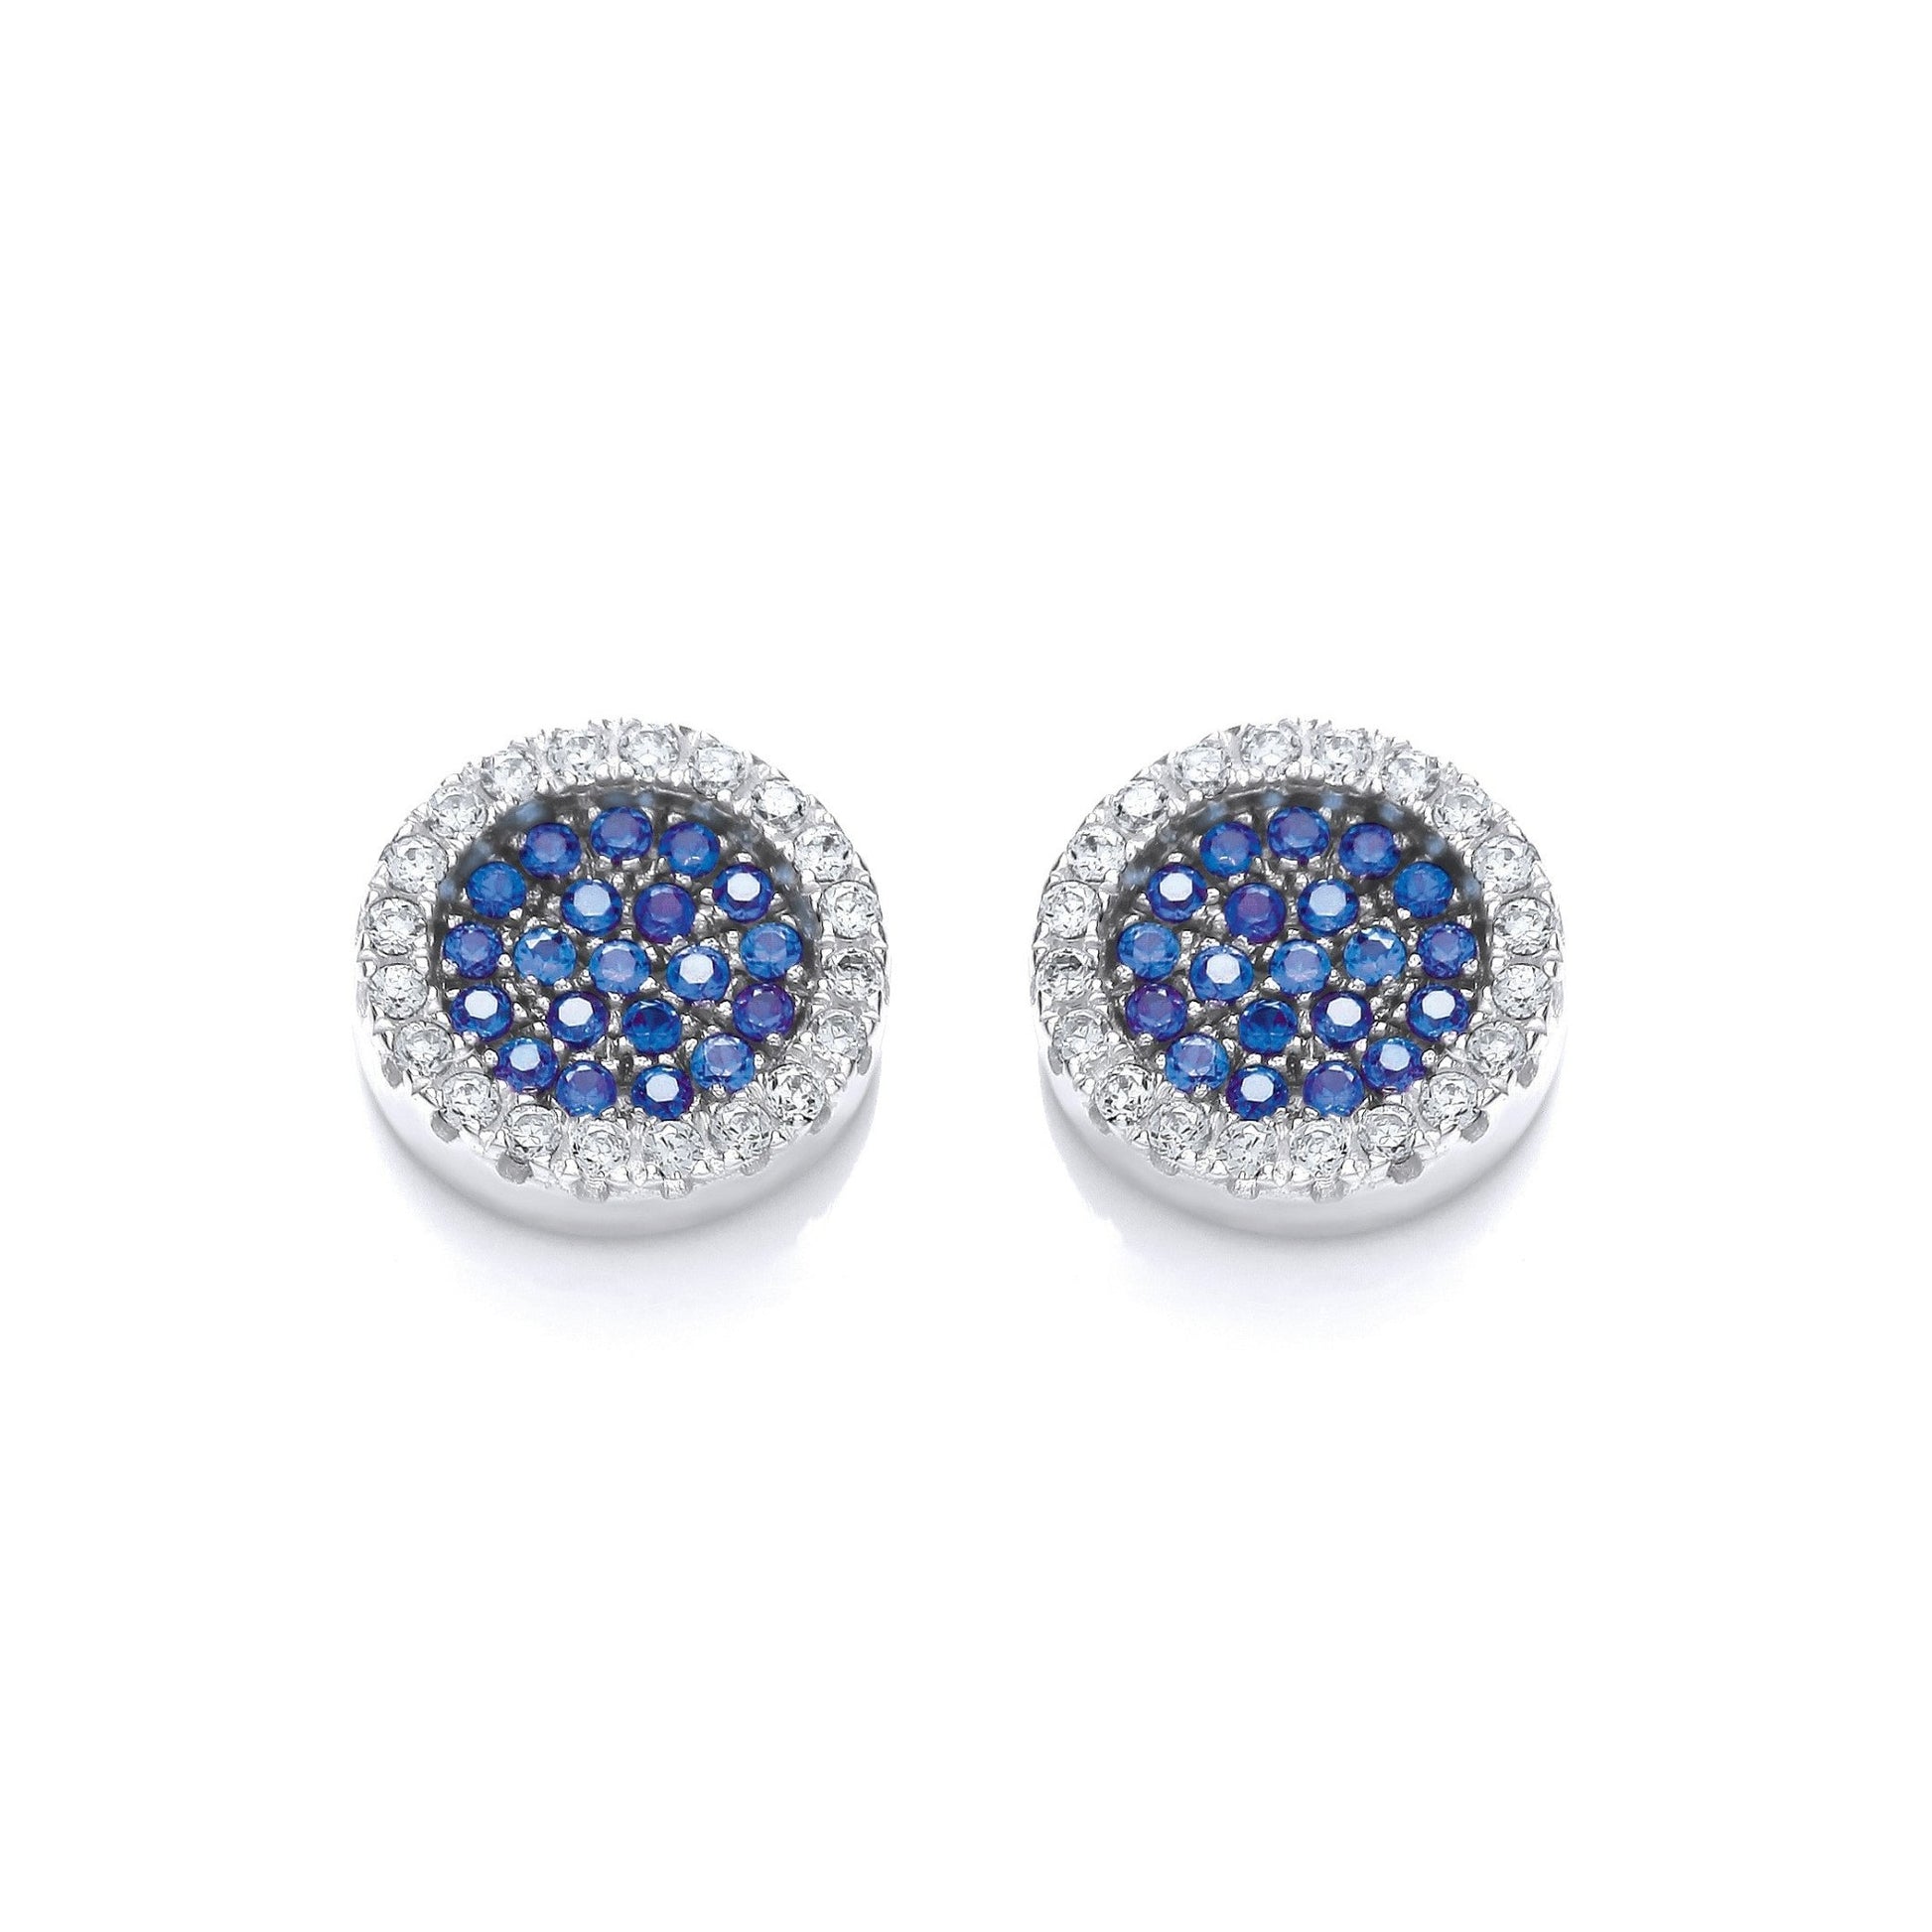 Cluster Stud 925 Sterling Silver Earrings Set With Blue CZs - FJewellery